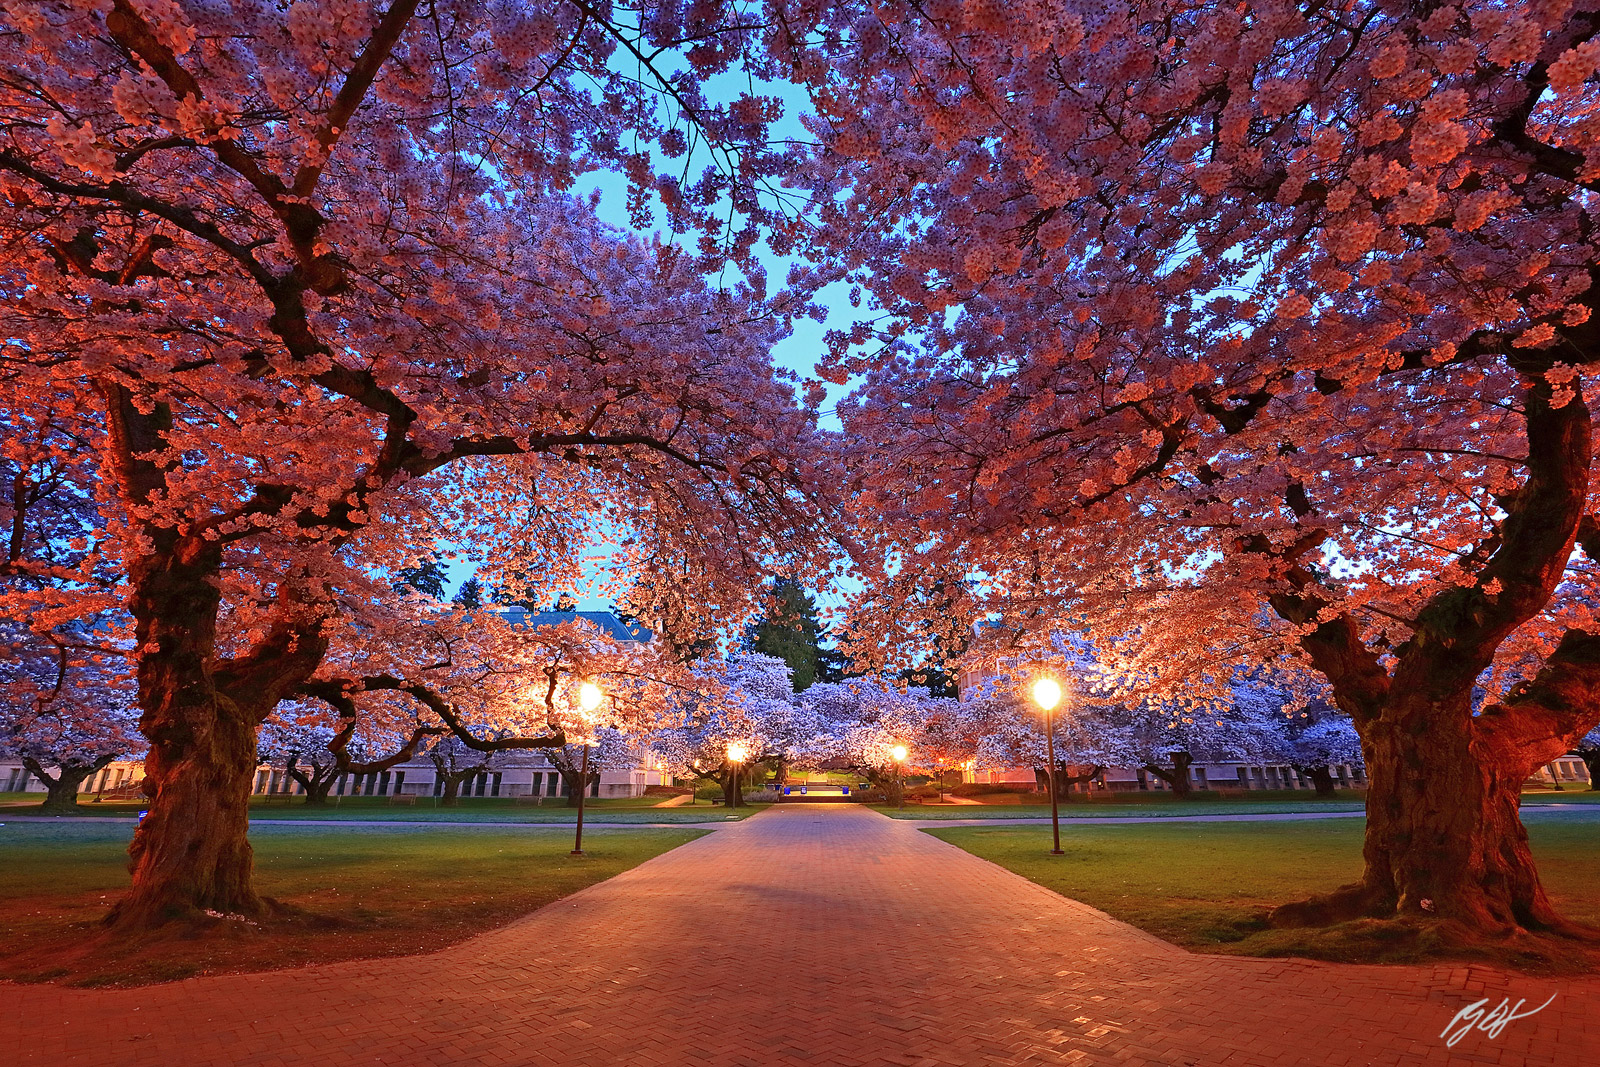 Cherry trees in Bloom in the University of Washington Quad in Seattle Washington